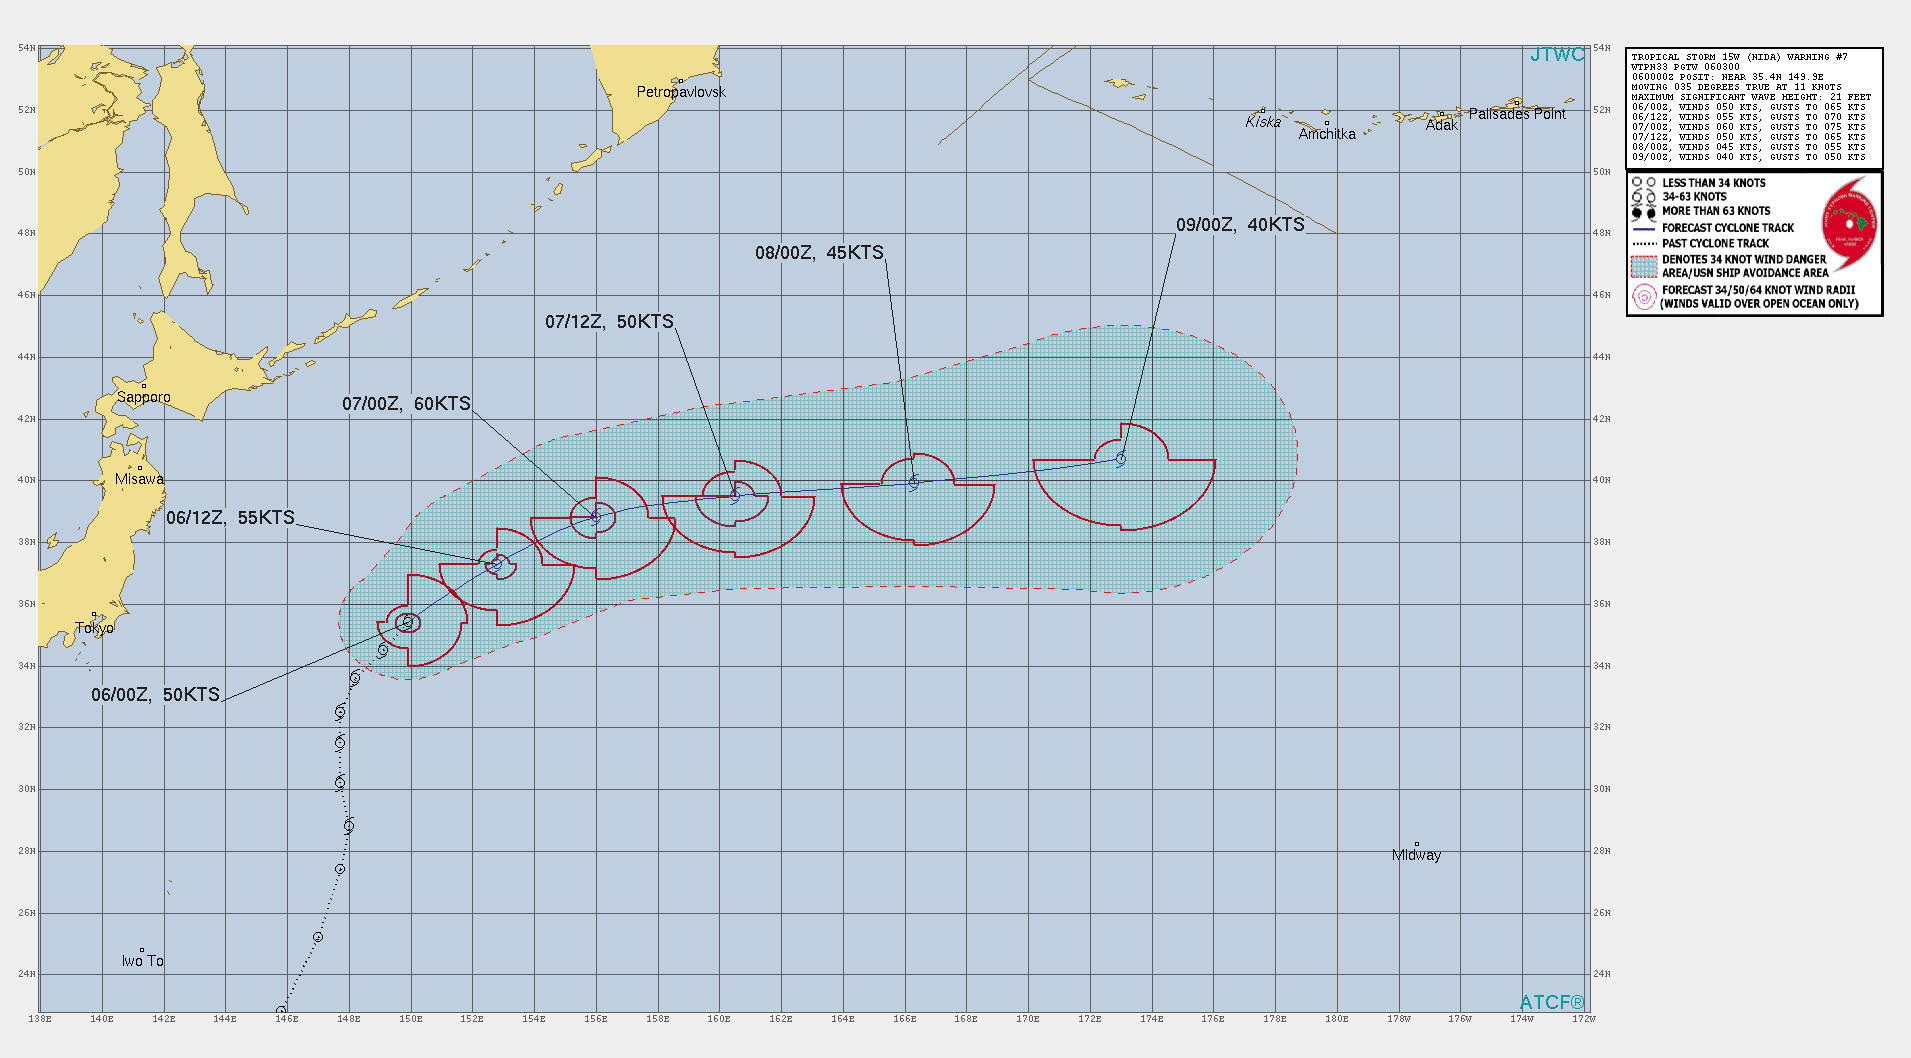 TS 15W(NIDA). WARNING 7 ISSUED AT 06/03UTC.SIGNIFICANT FORECAST CHANGES: DUE TO THE RAPID CONSOLIDATION, THE  PEAK INTENSITY HAS BEEN INCREASED TO 60 KNOTS.  FORECAST DISCUSSION: TROPICAL STORM 15W (NIDA) WILL CONTINUE TRACKING GENERALLY NORTHEASTWARD AROUND THE PERIPHERY OF A SUBTROPICAL RIDGE TO THE EAST-SOUTHEAST OVER THE NEXT 24 HOURS, THEN SHIFT MORE EASTWARD THEREAFTER. VERTICAL WIND SHEAR IS EXPECTED  TO REMAIN LOW UNTIL 36H AND SEA SURFACE TEMPERATURES (SST) WILL BE 26-27 DEGREES CELSIUS WHICH WILL CONTRIBUTE TO A SHARP INTENSIFICATION TO THE PEAK INTENSITY OF 60 KNOTS BY 24H. AT 36H THE SYSTEM IS EXPECTED TO WEAKEN AS IT TRANSITS TO AN AREA OF STRONGER VERTICAL WIND SHEAR. AFTER 48H, TS NIDA WILL MOVE OVER COLDER WATERS THROUGHOUT THE REMAINDER OF THE FORECAST PERIOD. EXTRATROPICAL TRANSITION IS EXPECTED TO BEGIN AROUND 48 HOURS AND COMPLETE BY 72 HOURS AS TS NIDA INTERACTS WITH THE POLAR FRONT. THE JTWC FORECAST IS VERY SIMILAR TO THE PREVIOUS ONE.